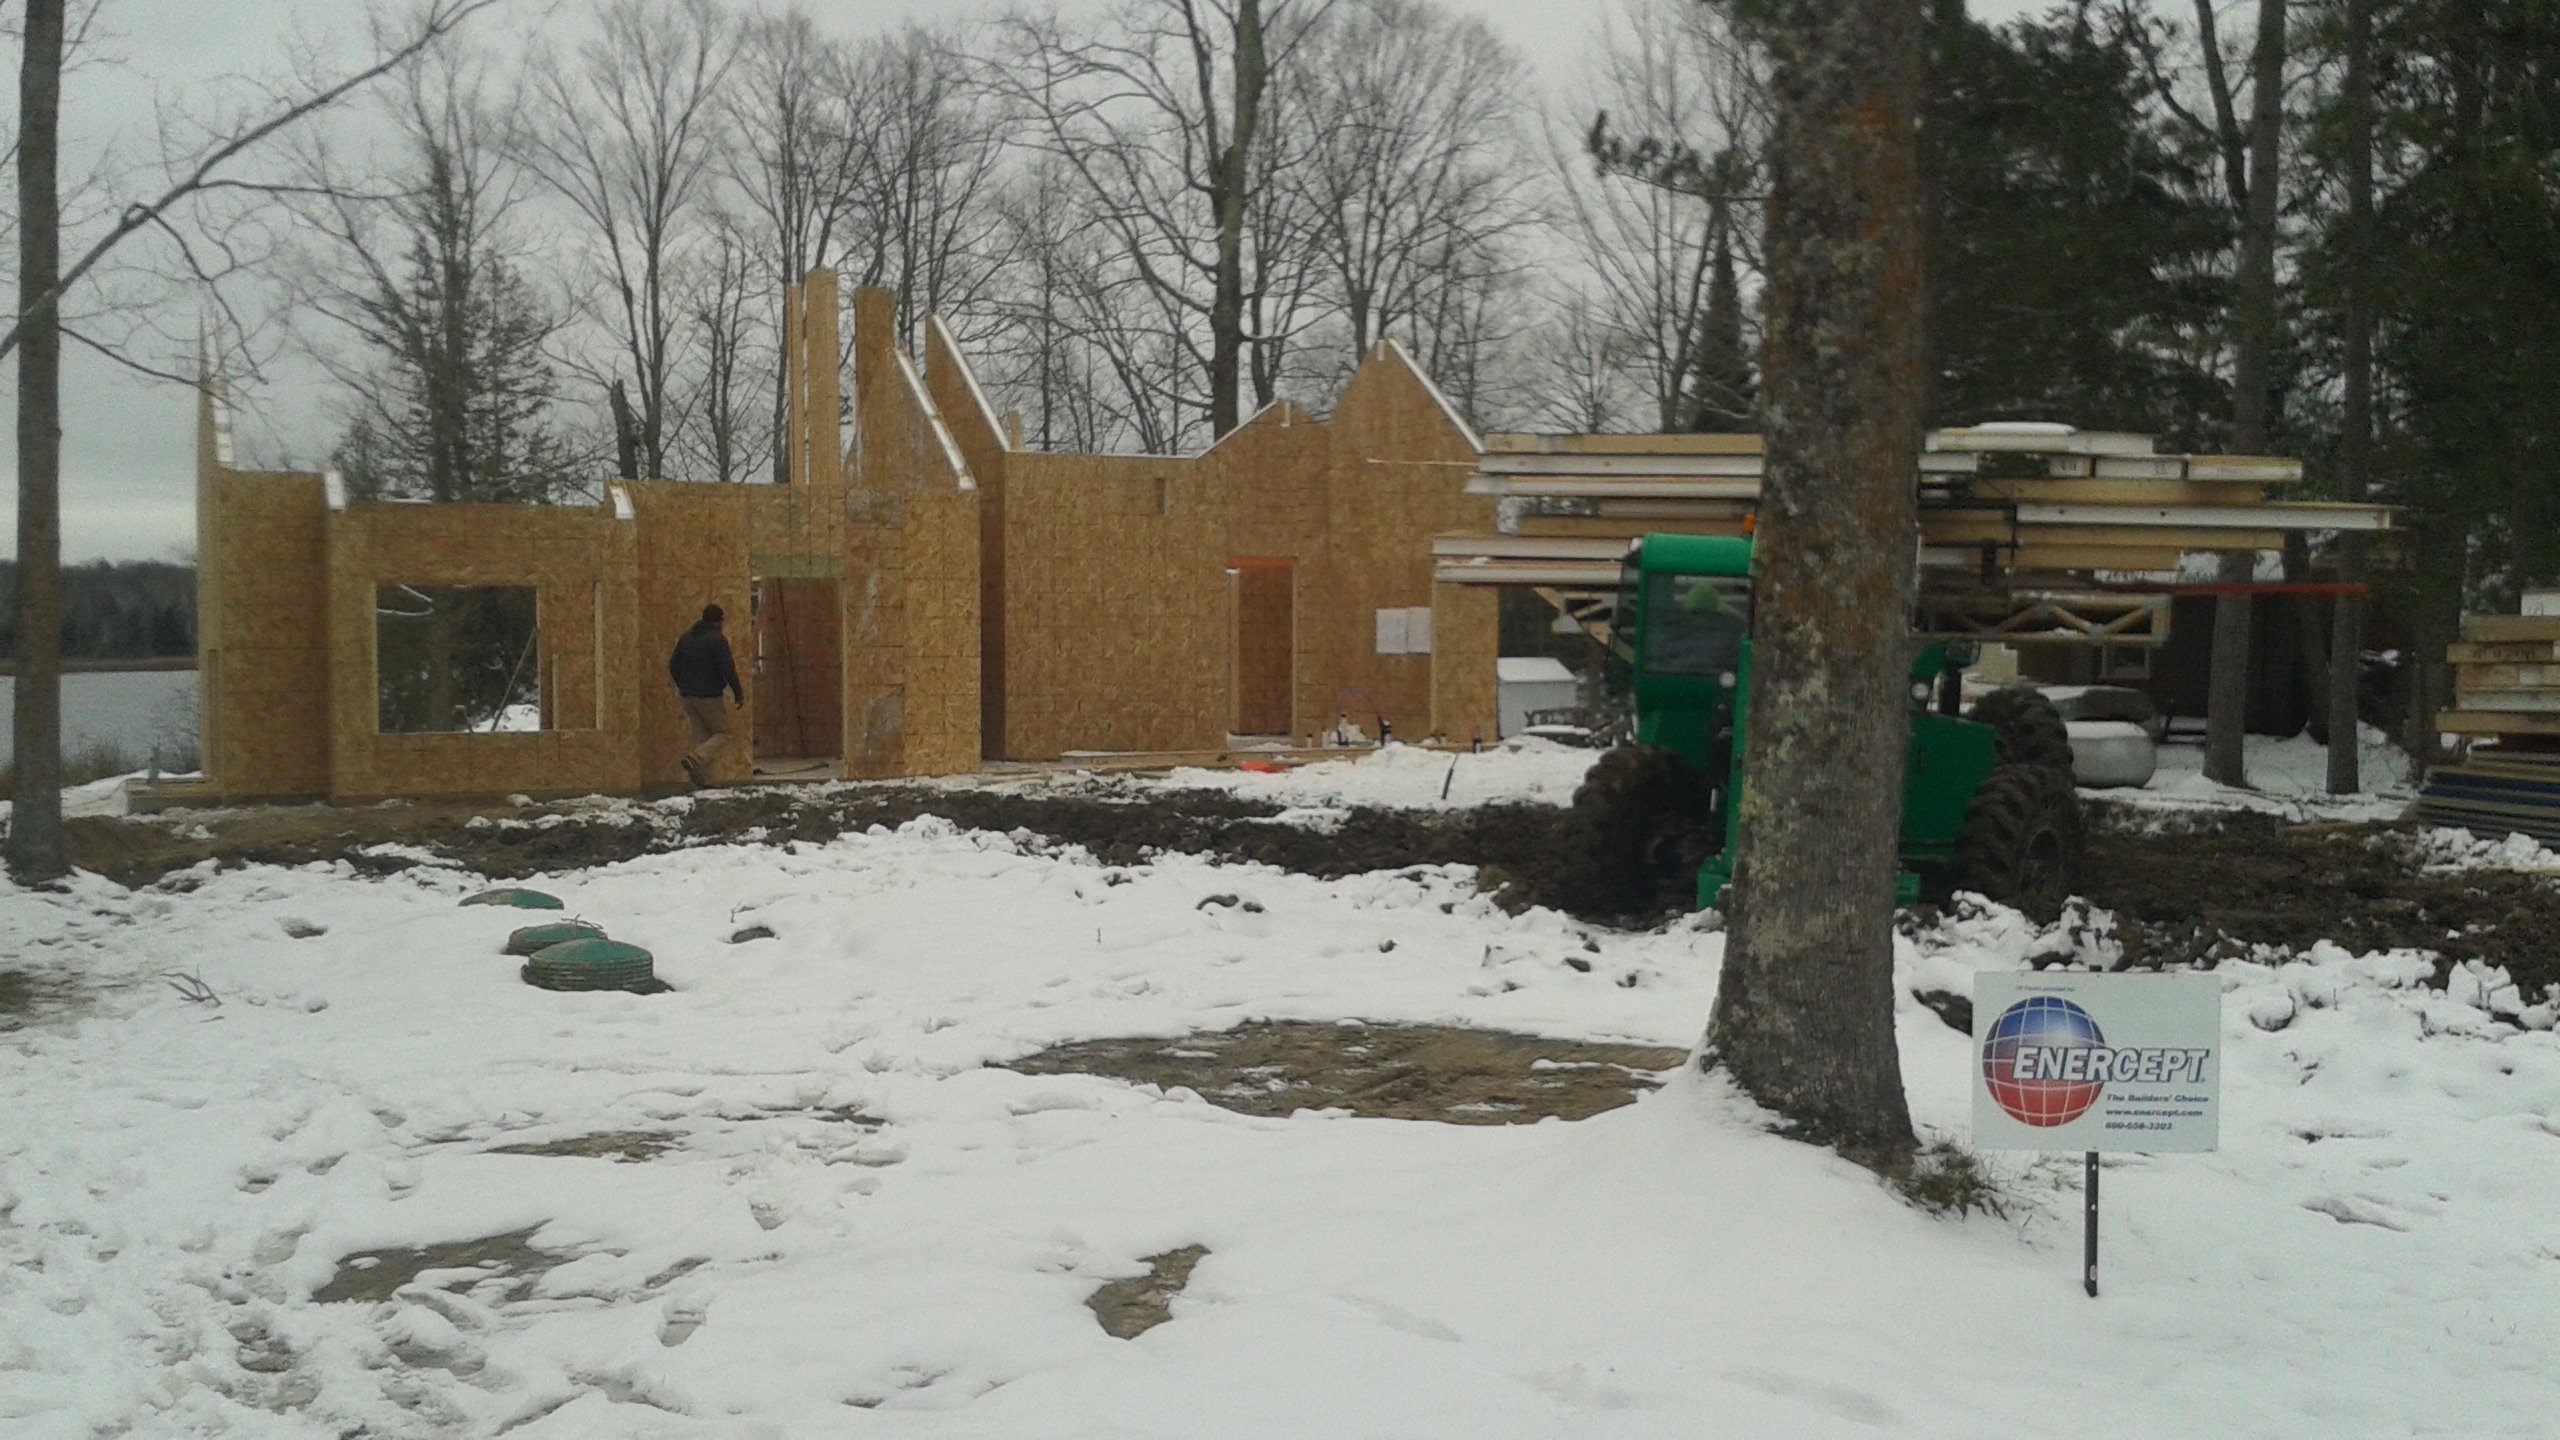 Winter Construction: More Cost-Effective and Comfortable With SIPs